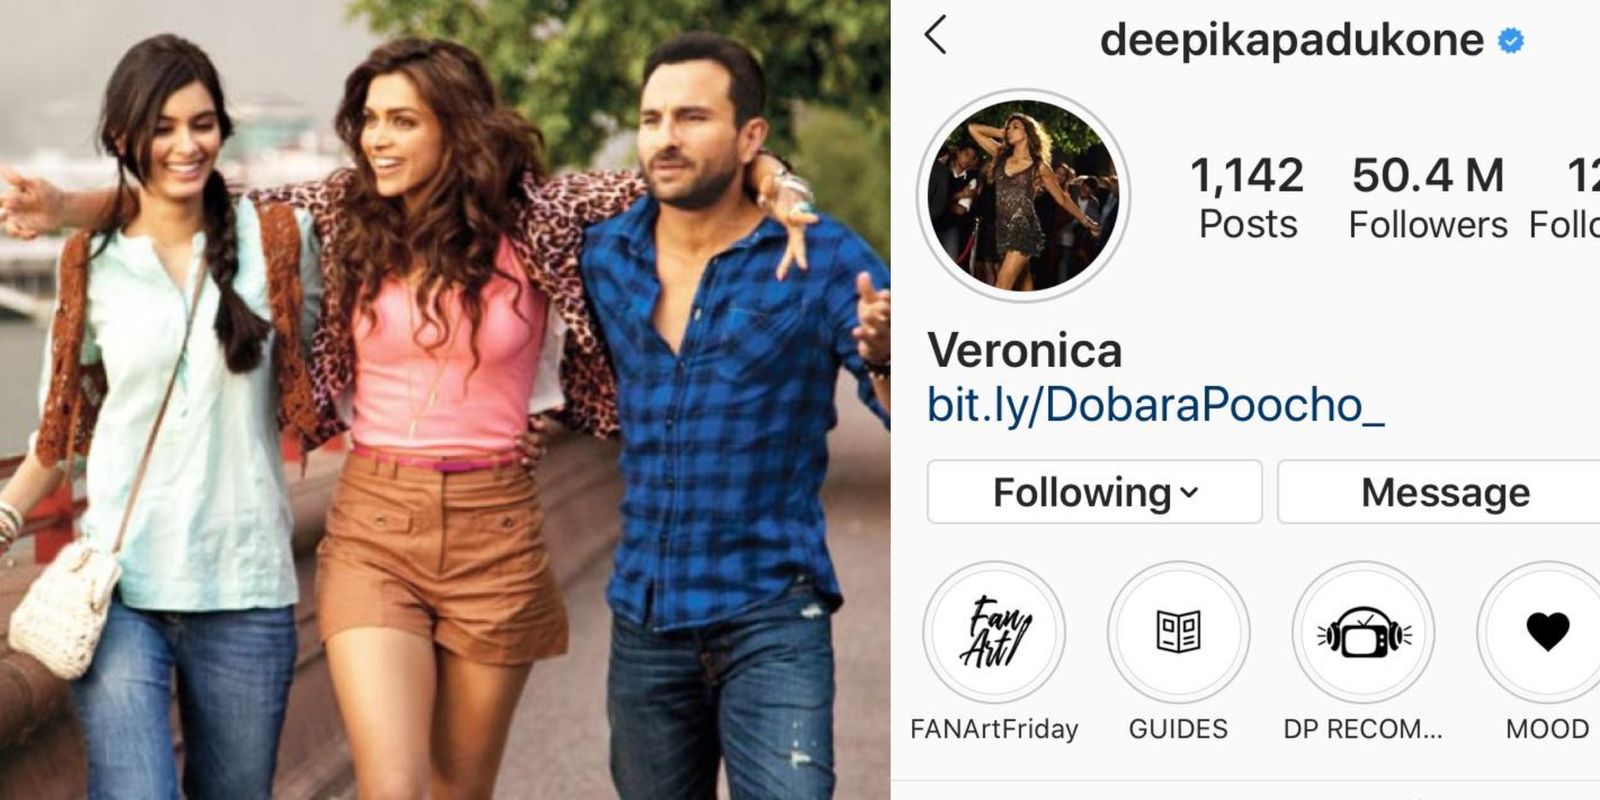 8 Years Of Cocktail: Deepika Changes Her Official Handle Name To ‘Veronica’; Diana Shares A Special Video